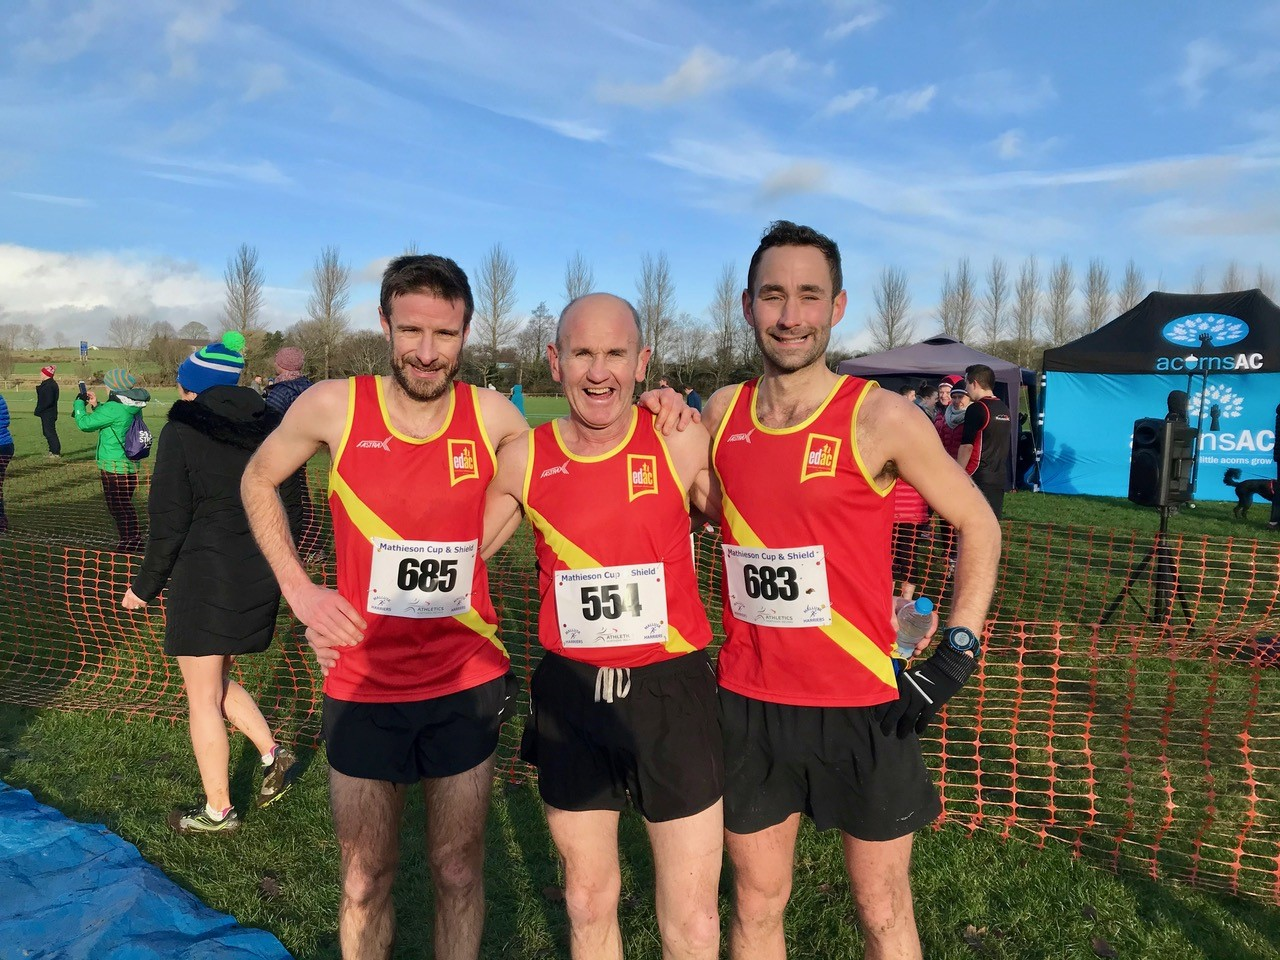 Neil Curran, Dee Murray and Gordy Graham glad to have completed their 4 laps